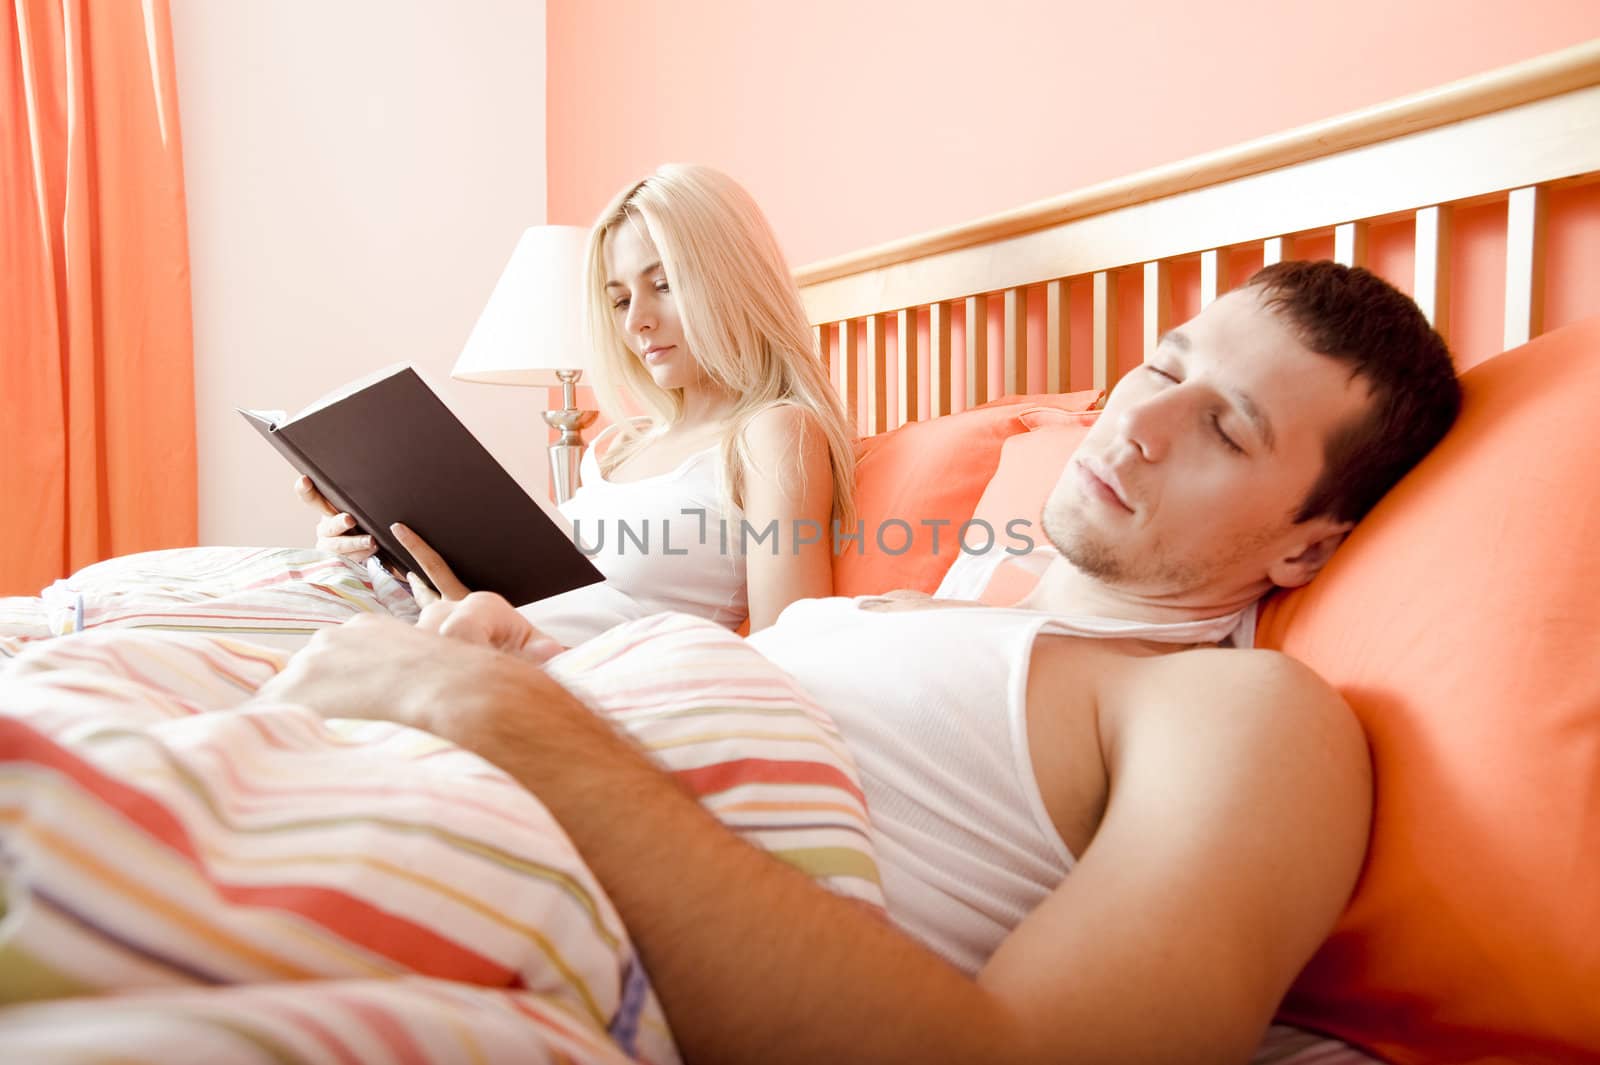 View of couple in bed, with woman reading book and man sleeping. Horizontal format.